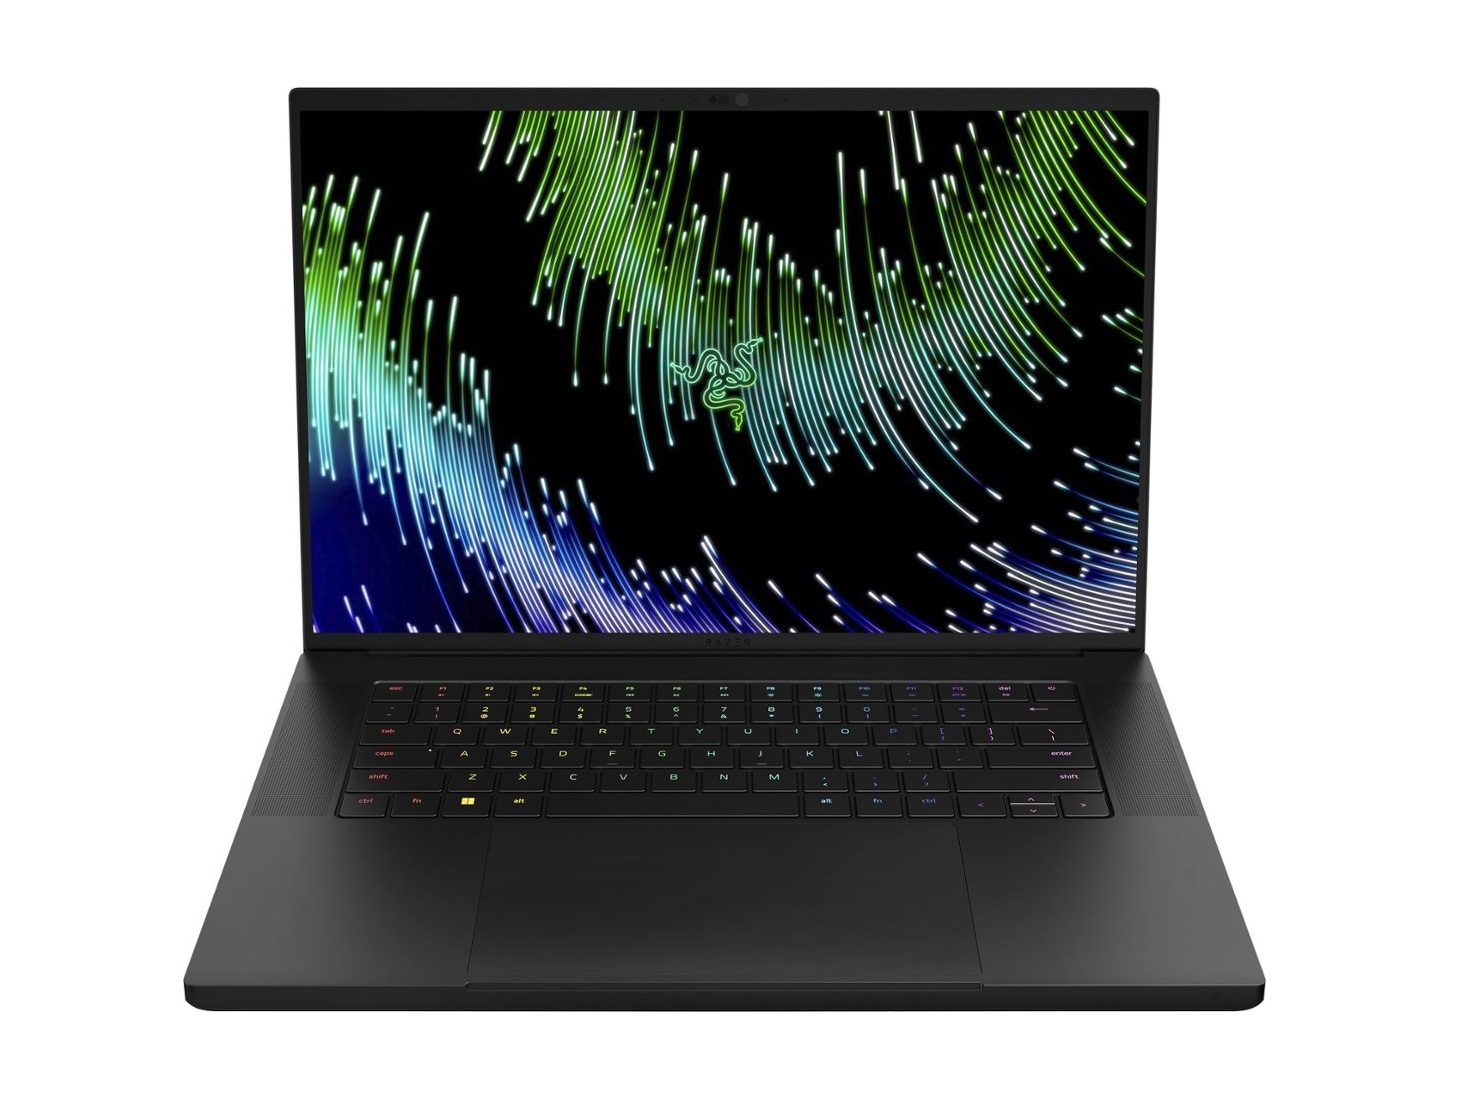 A version of the Razer Blade 16 with an IPS screen.